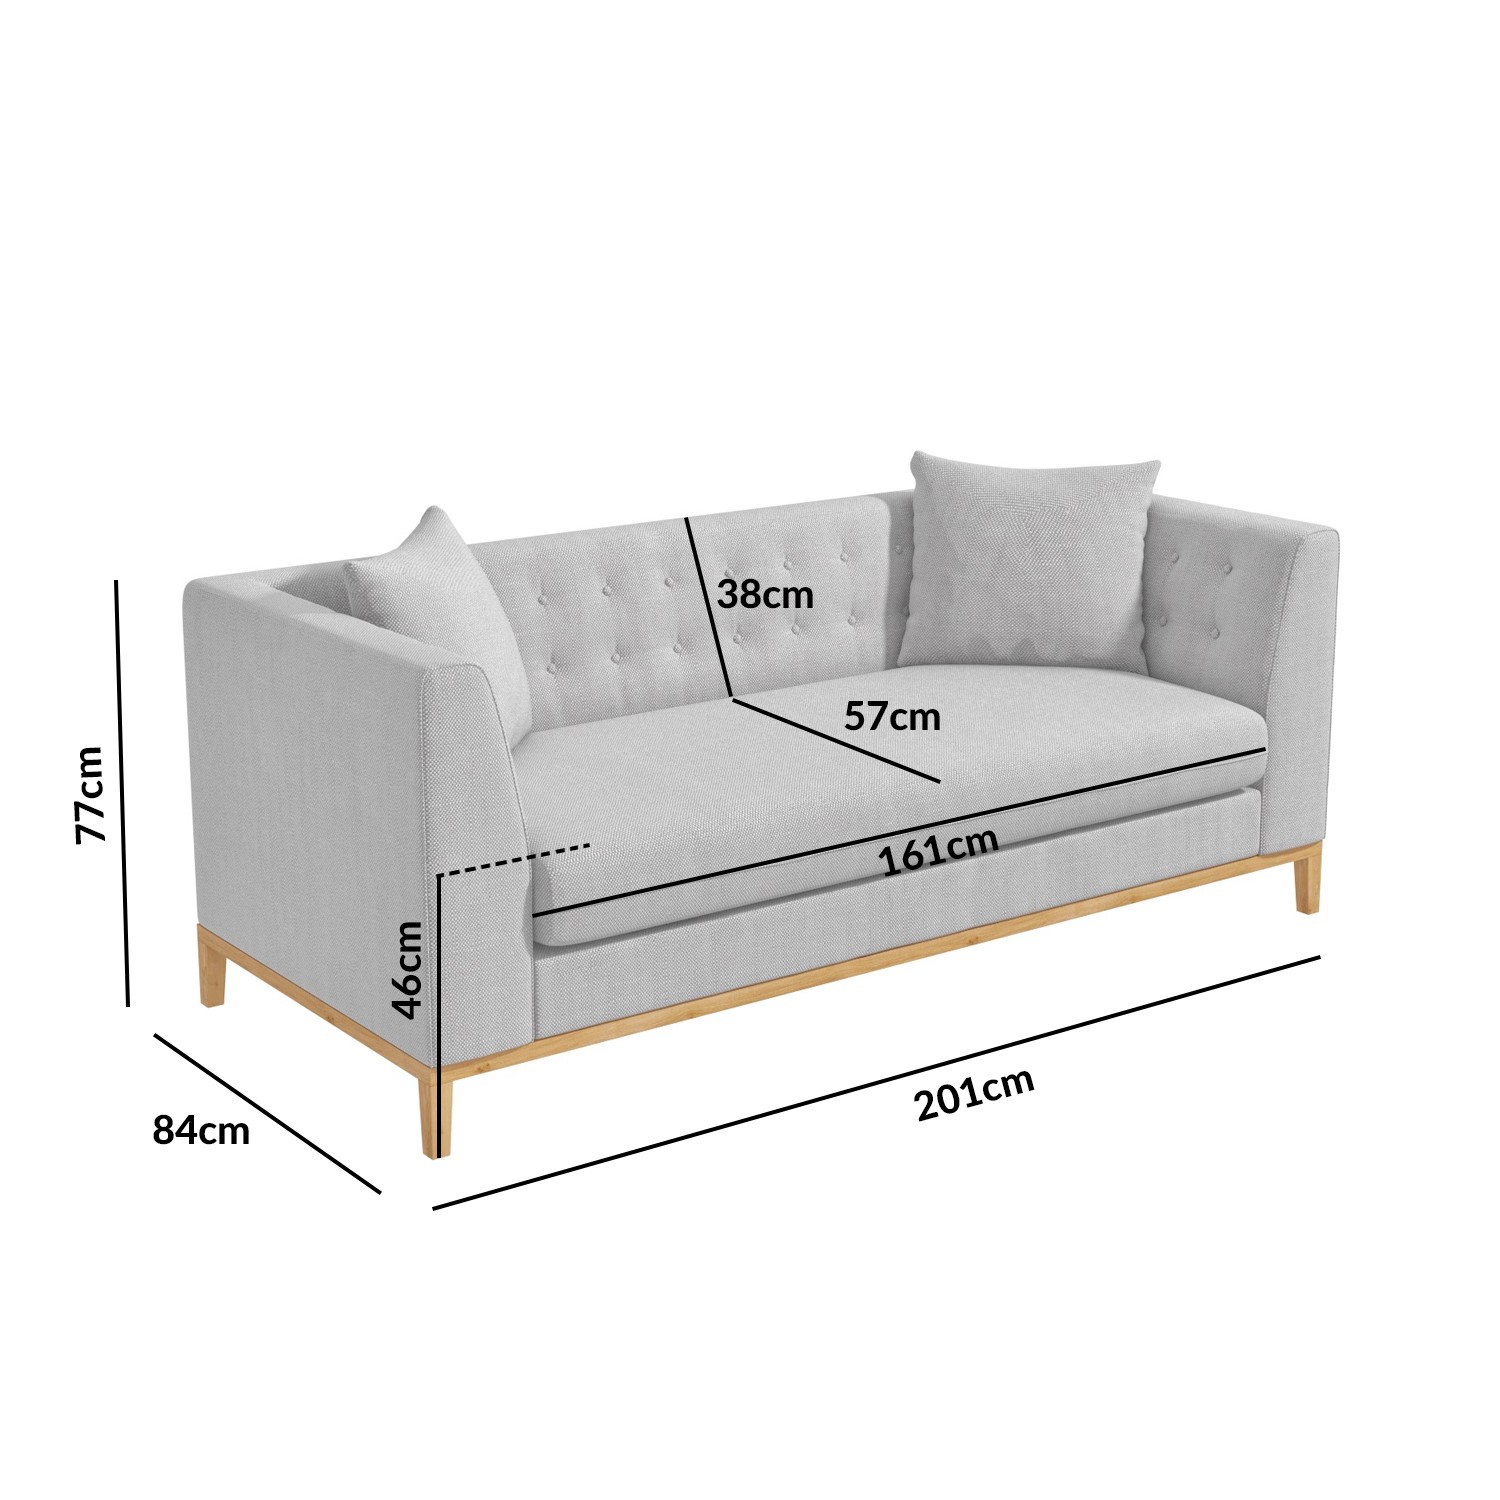 Erin Light Grey Fabric 3 Seater Sofa, How Long Is A 3 Seater Sofa In Meters